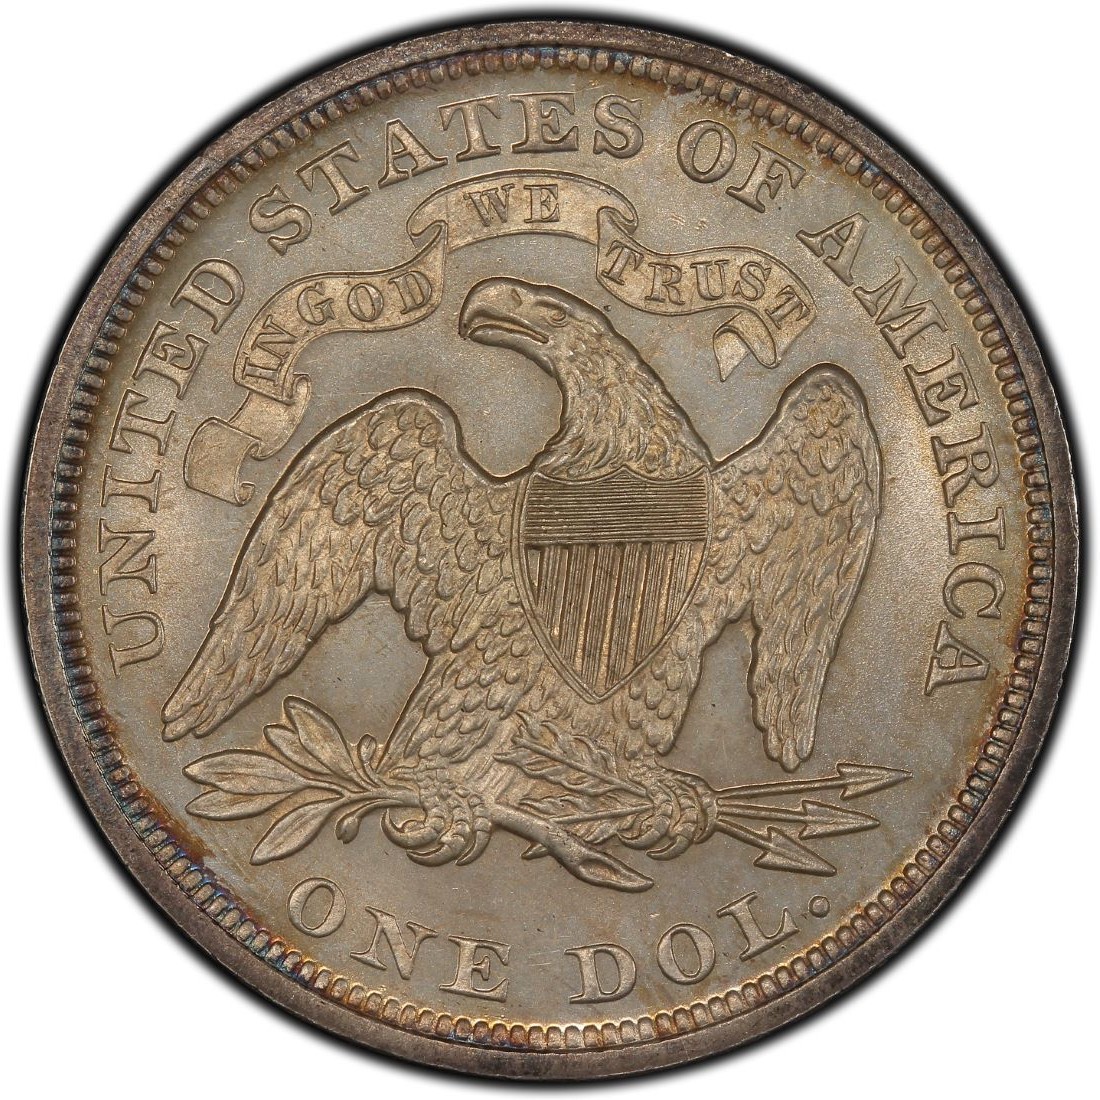 value of us liberty coins